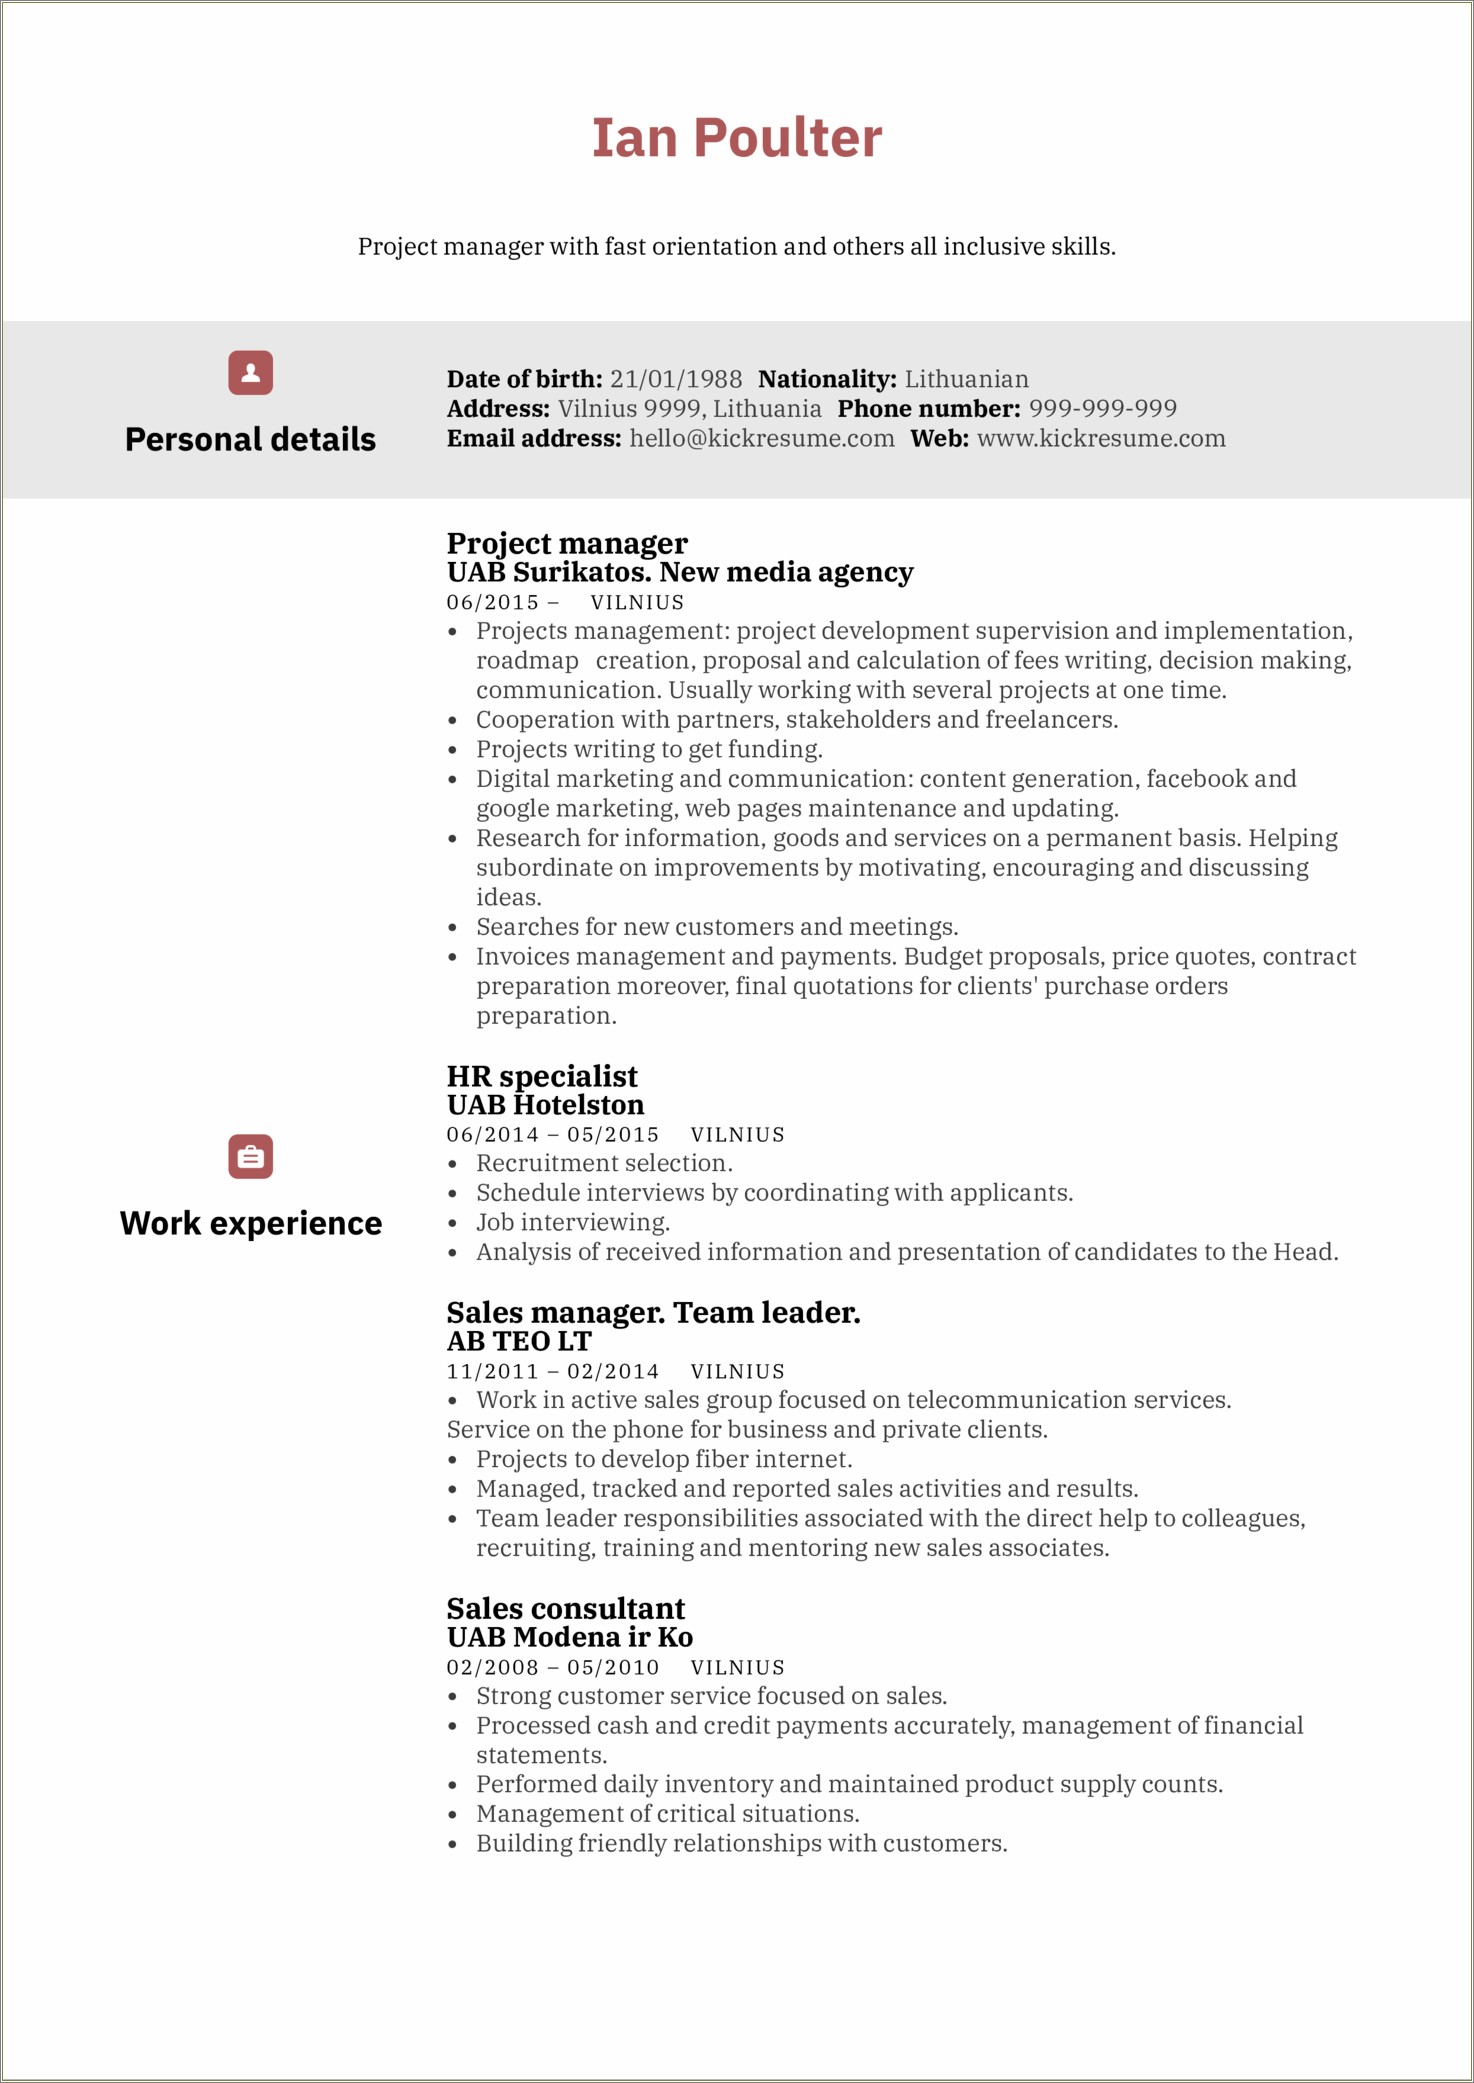 Sample Resume For A Sale Manager Telecomunication